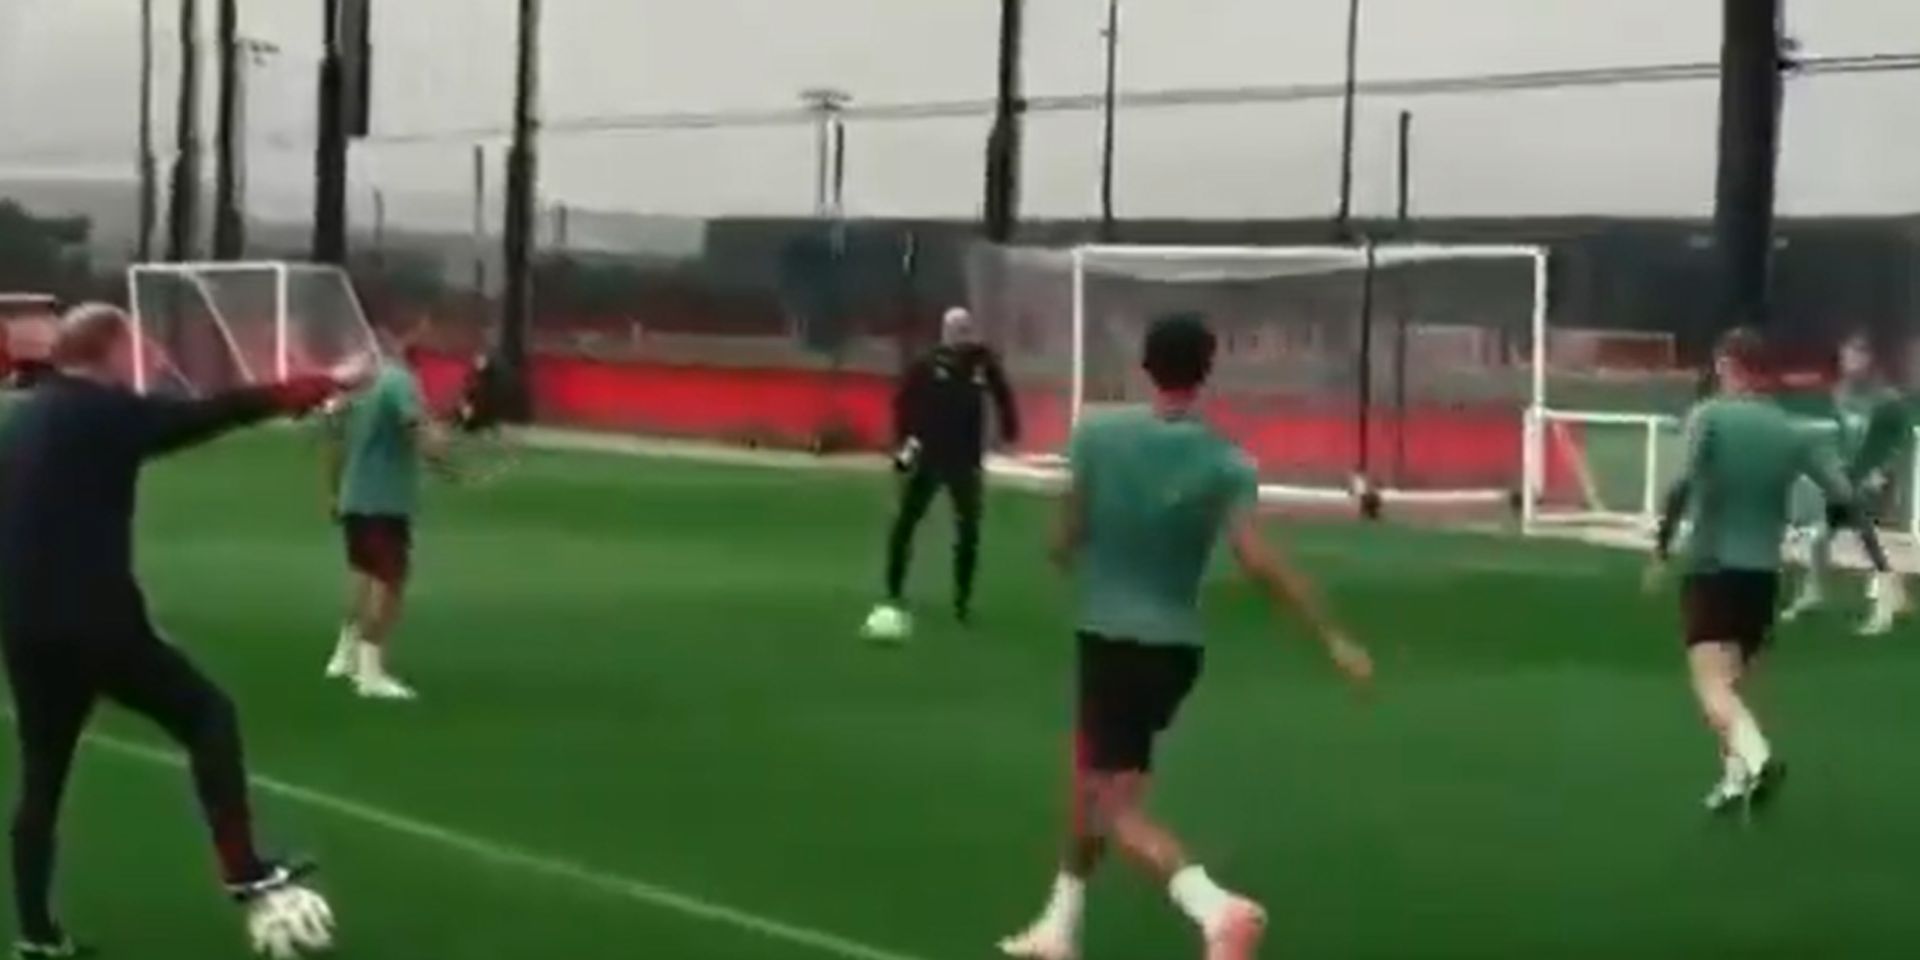 (Video) Slot shows off playing talents by taking part in training with Liverpool squad